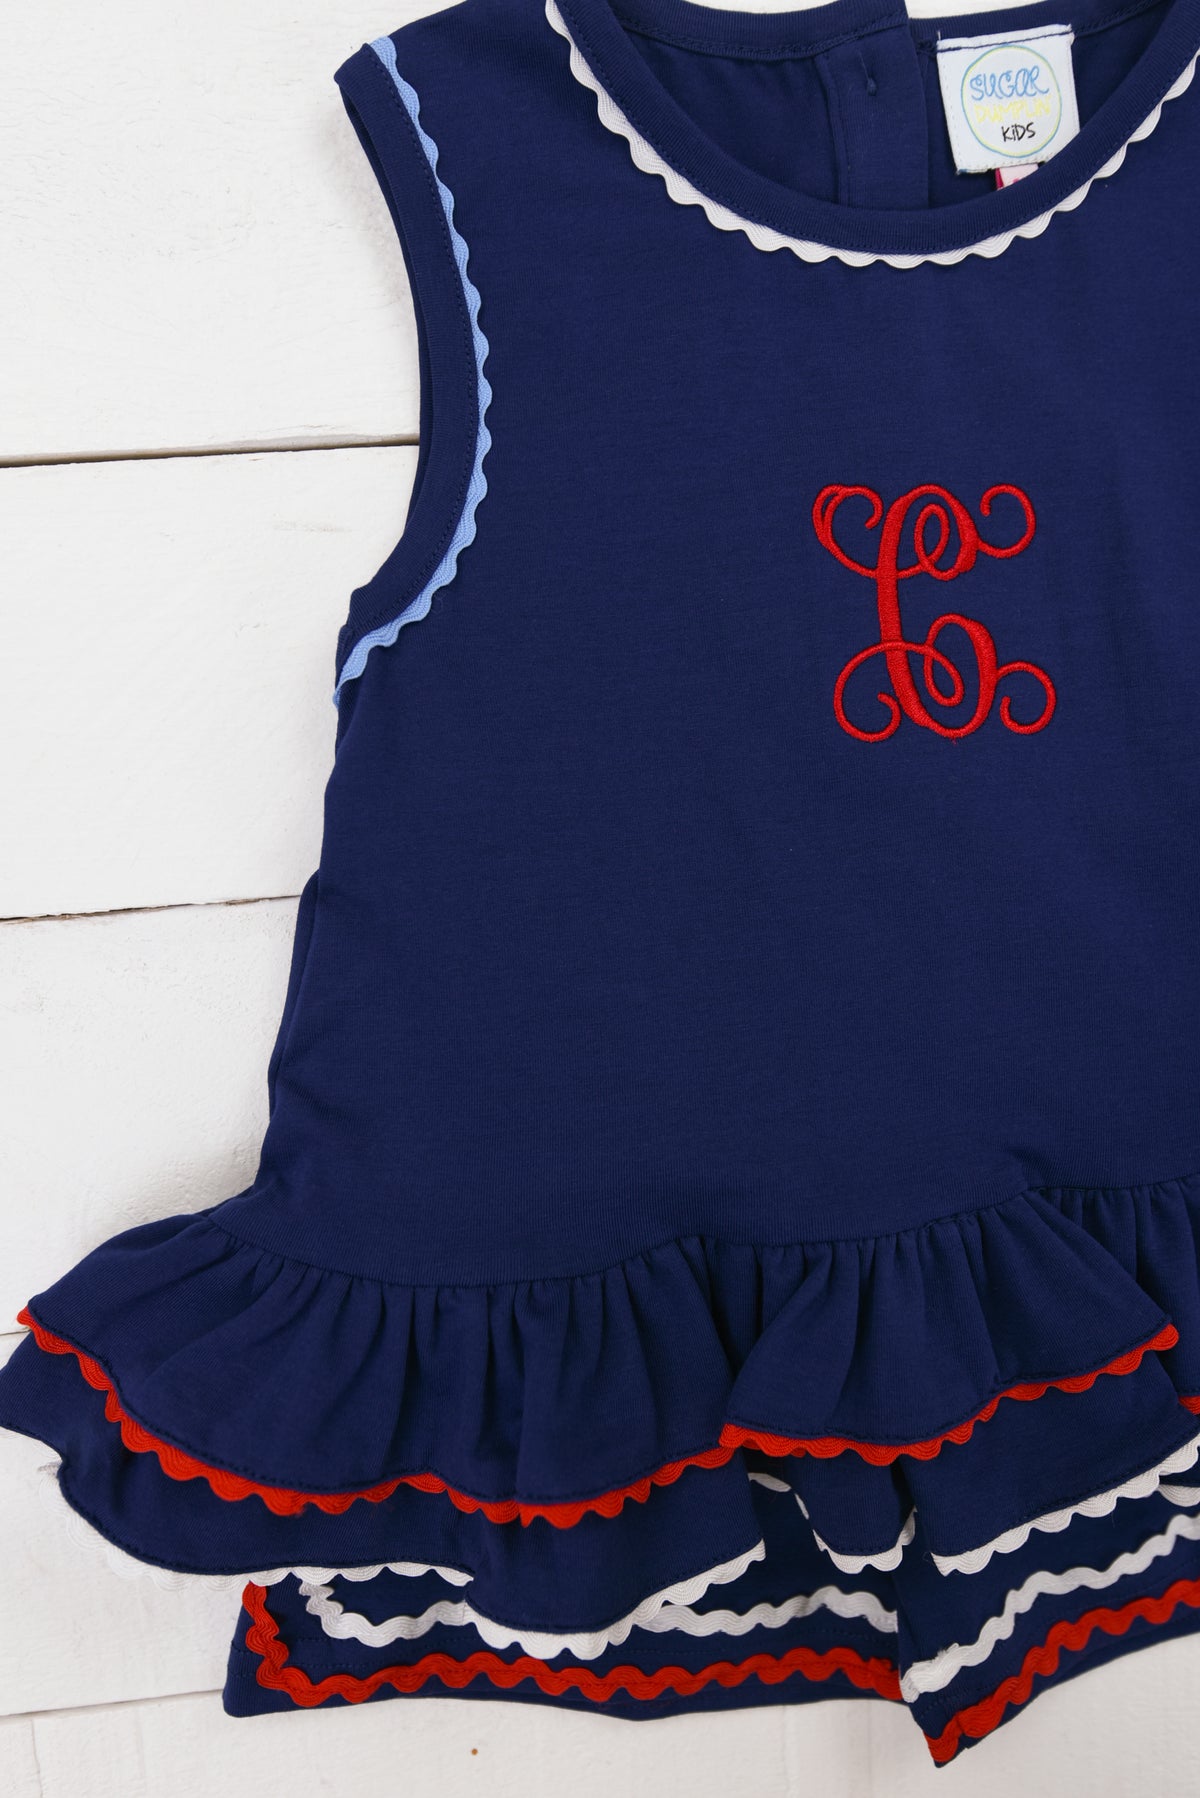 a little girl's blue dress with red and white ruffles